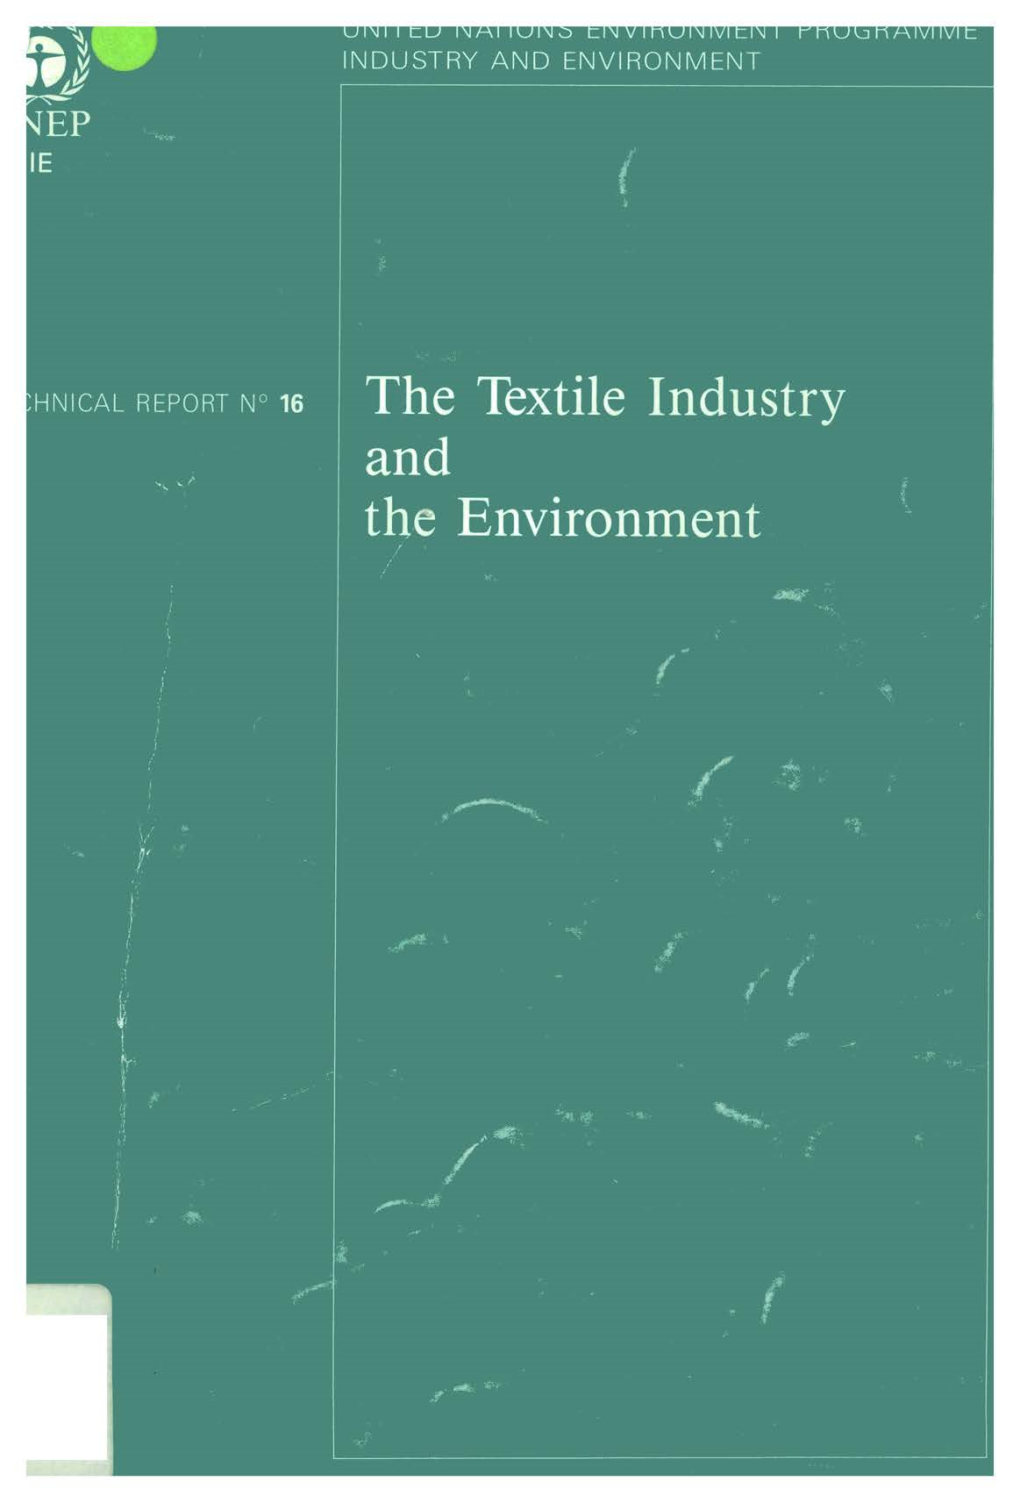 The Textile Industry and the Environment the 7TEXTI LE I--- INDUSTRY and the ENVIRONMENT